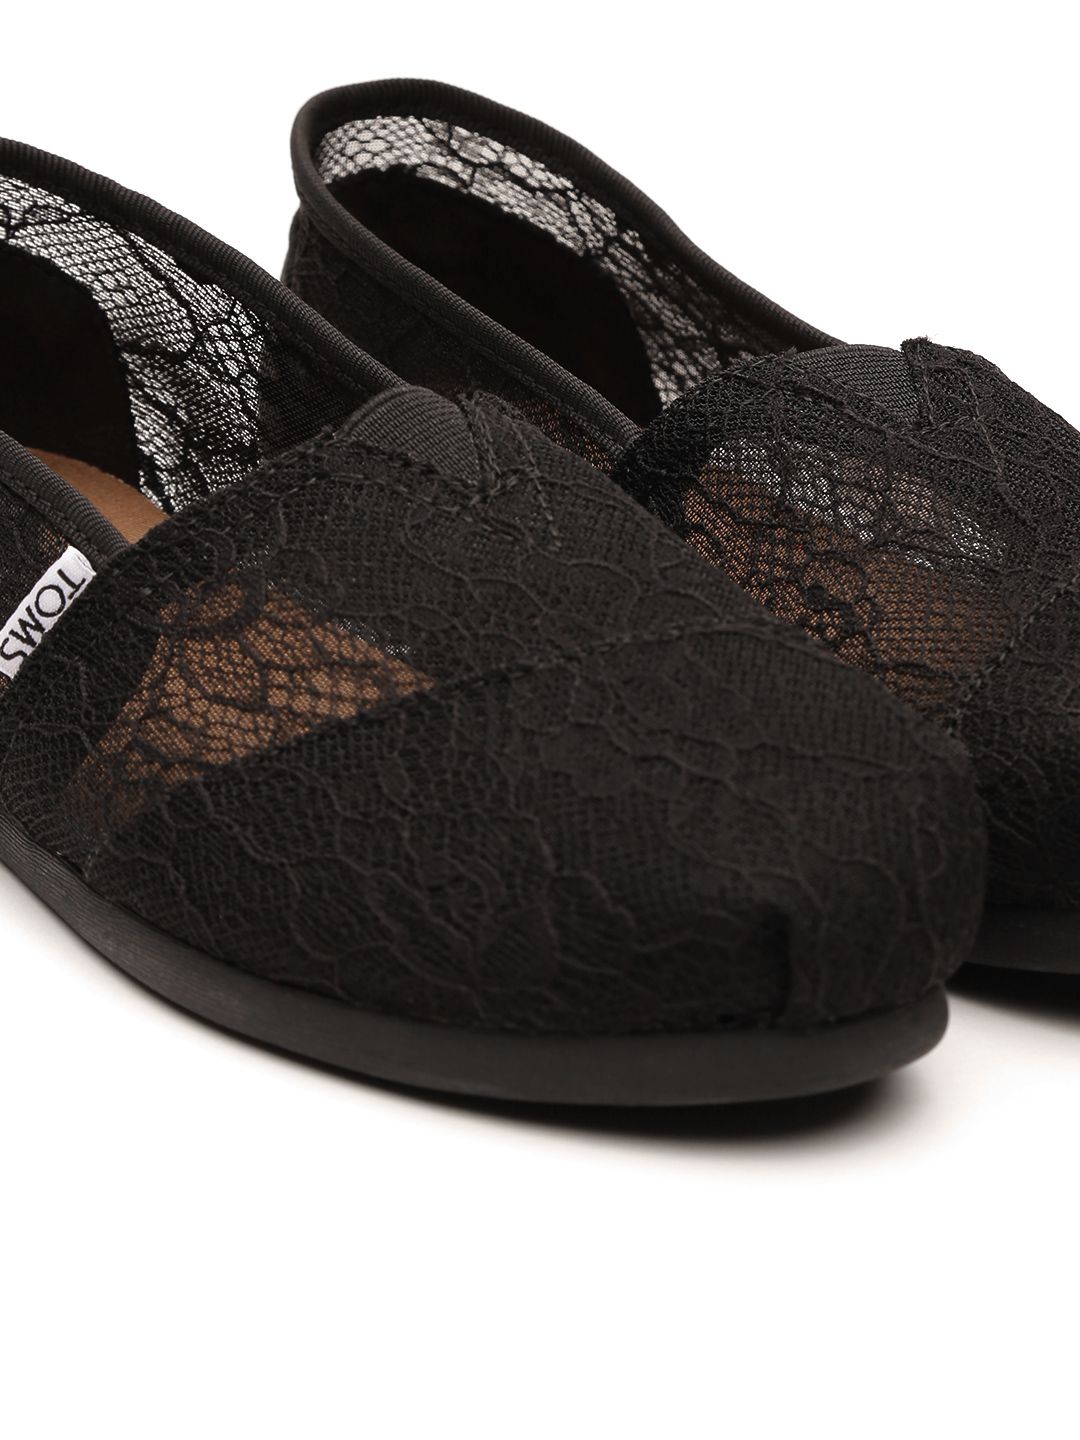 Toms Black Casual Shoes Price in India Buy Toms Black